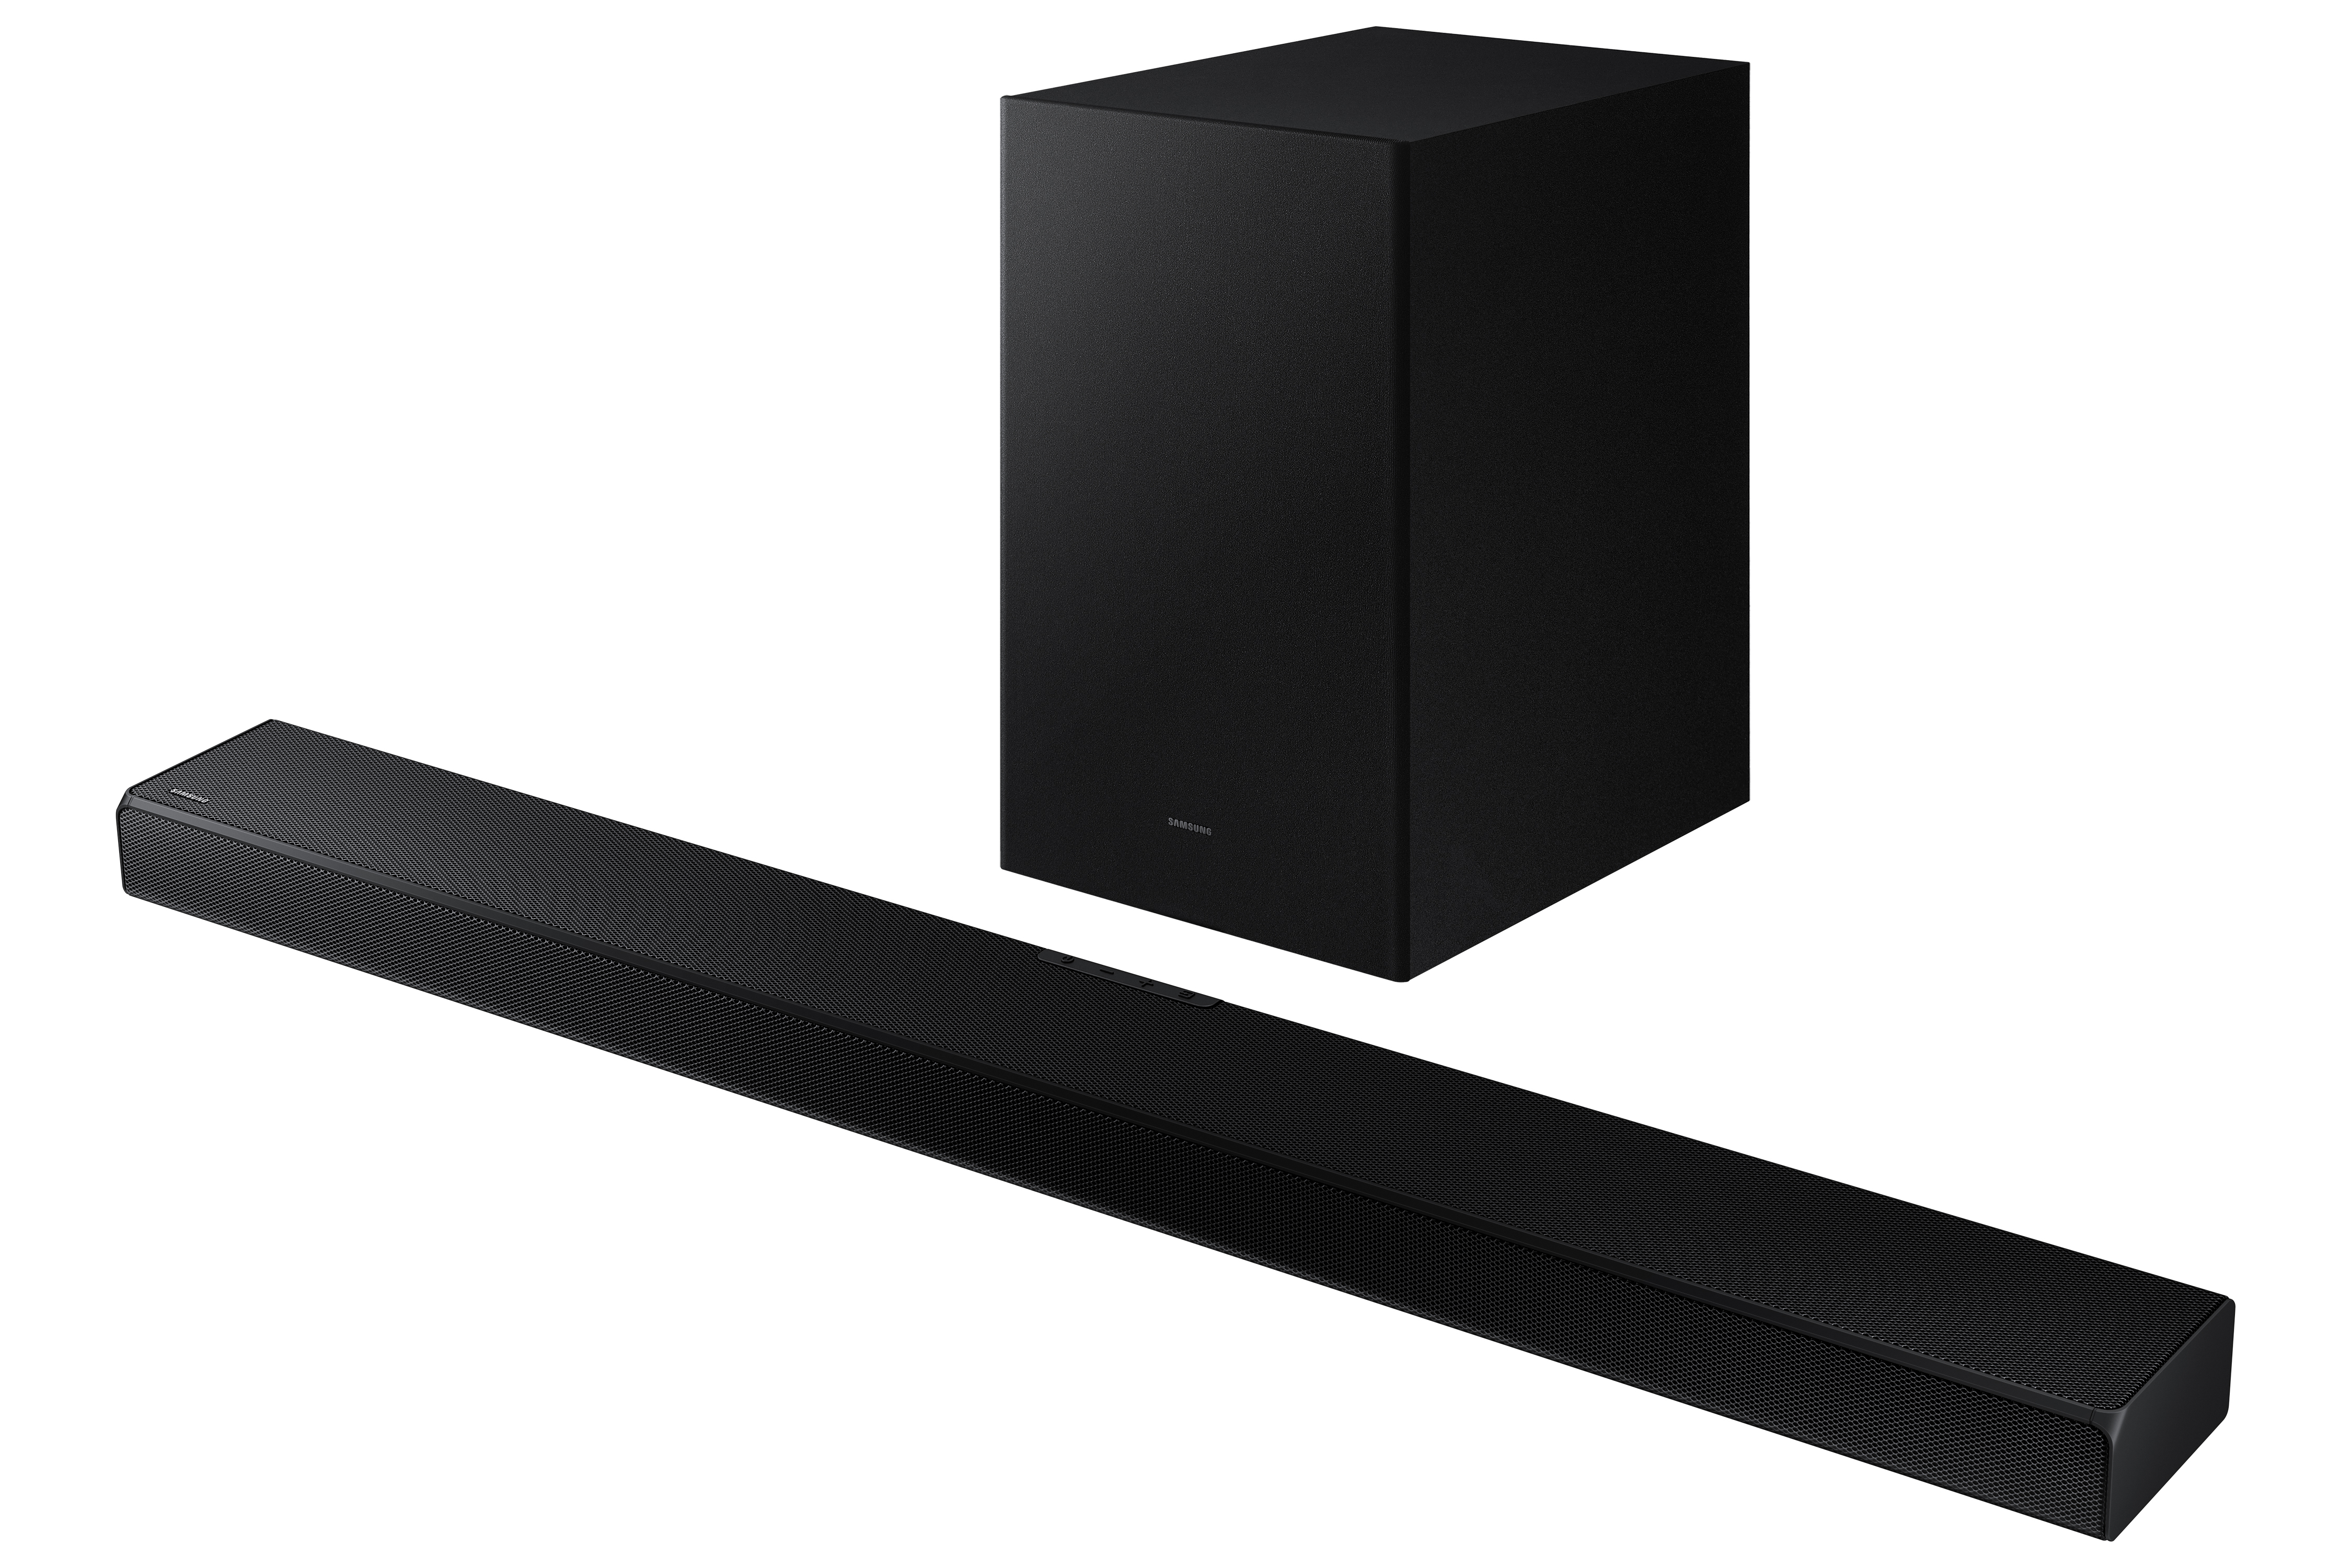 SAMSUNG HW-A650 3.1 Channel Soundbar with Wireless Subwoofer and Dolby 5.1 / DTS Virtual:X - image 3 of 8